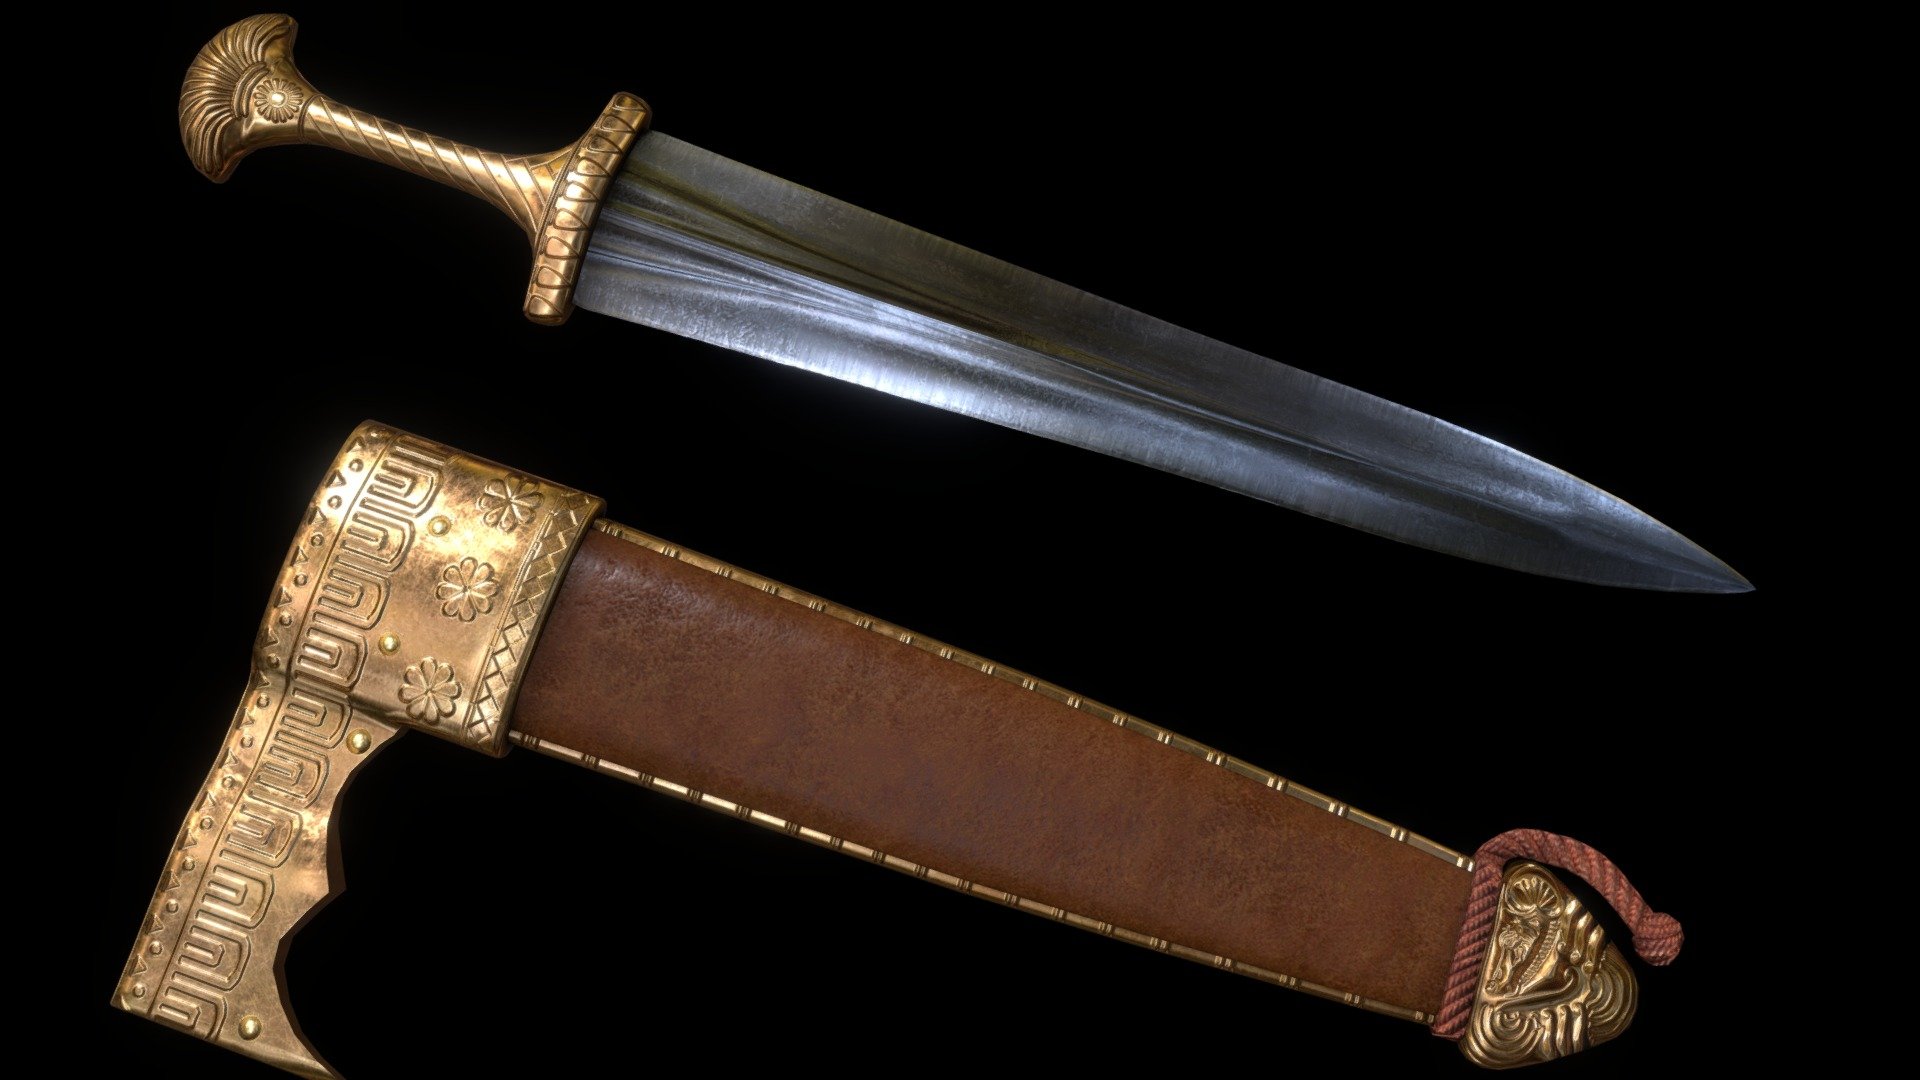 An ancient Mesopotamian dagger or short sword from Scythian origin, used mainly in the first millennium BCE. 

Worn to the side of the Belt or at the center, Horace mention it as &ldquo;Medus Acinaces